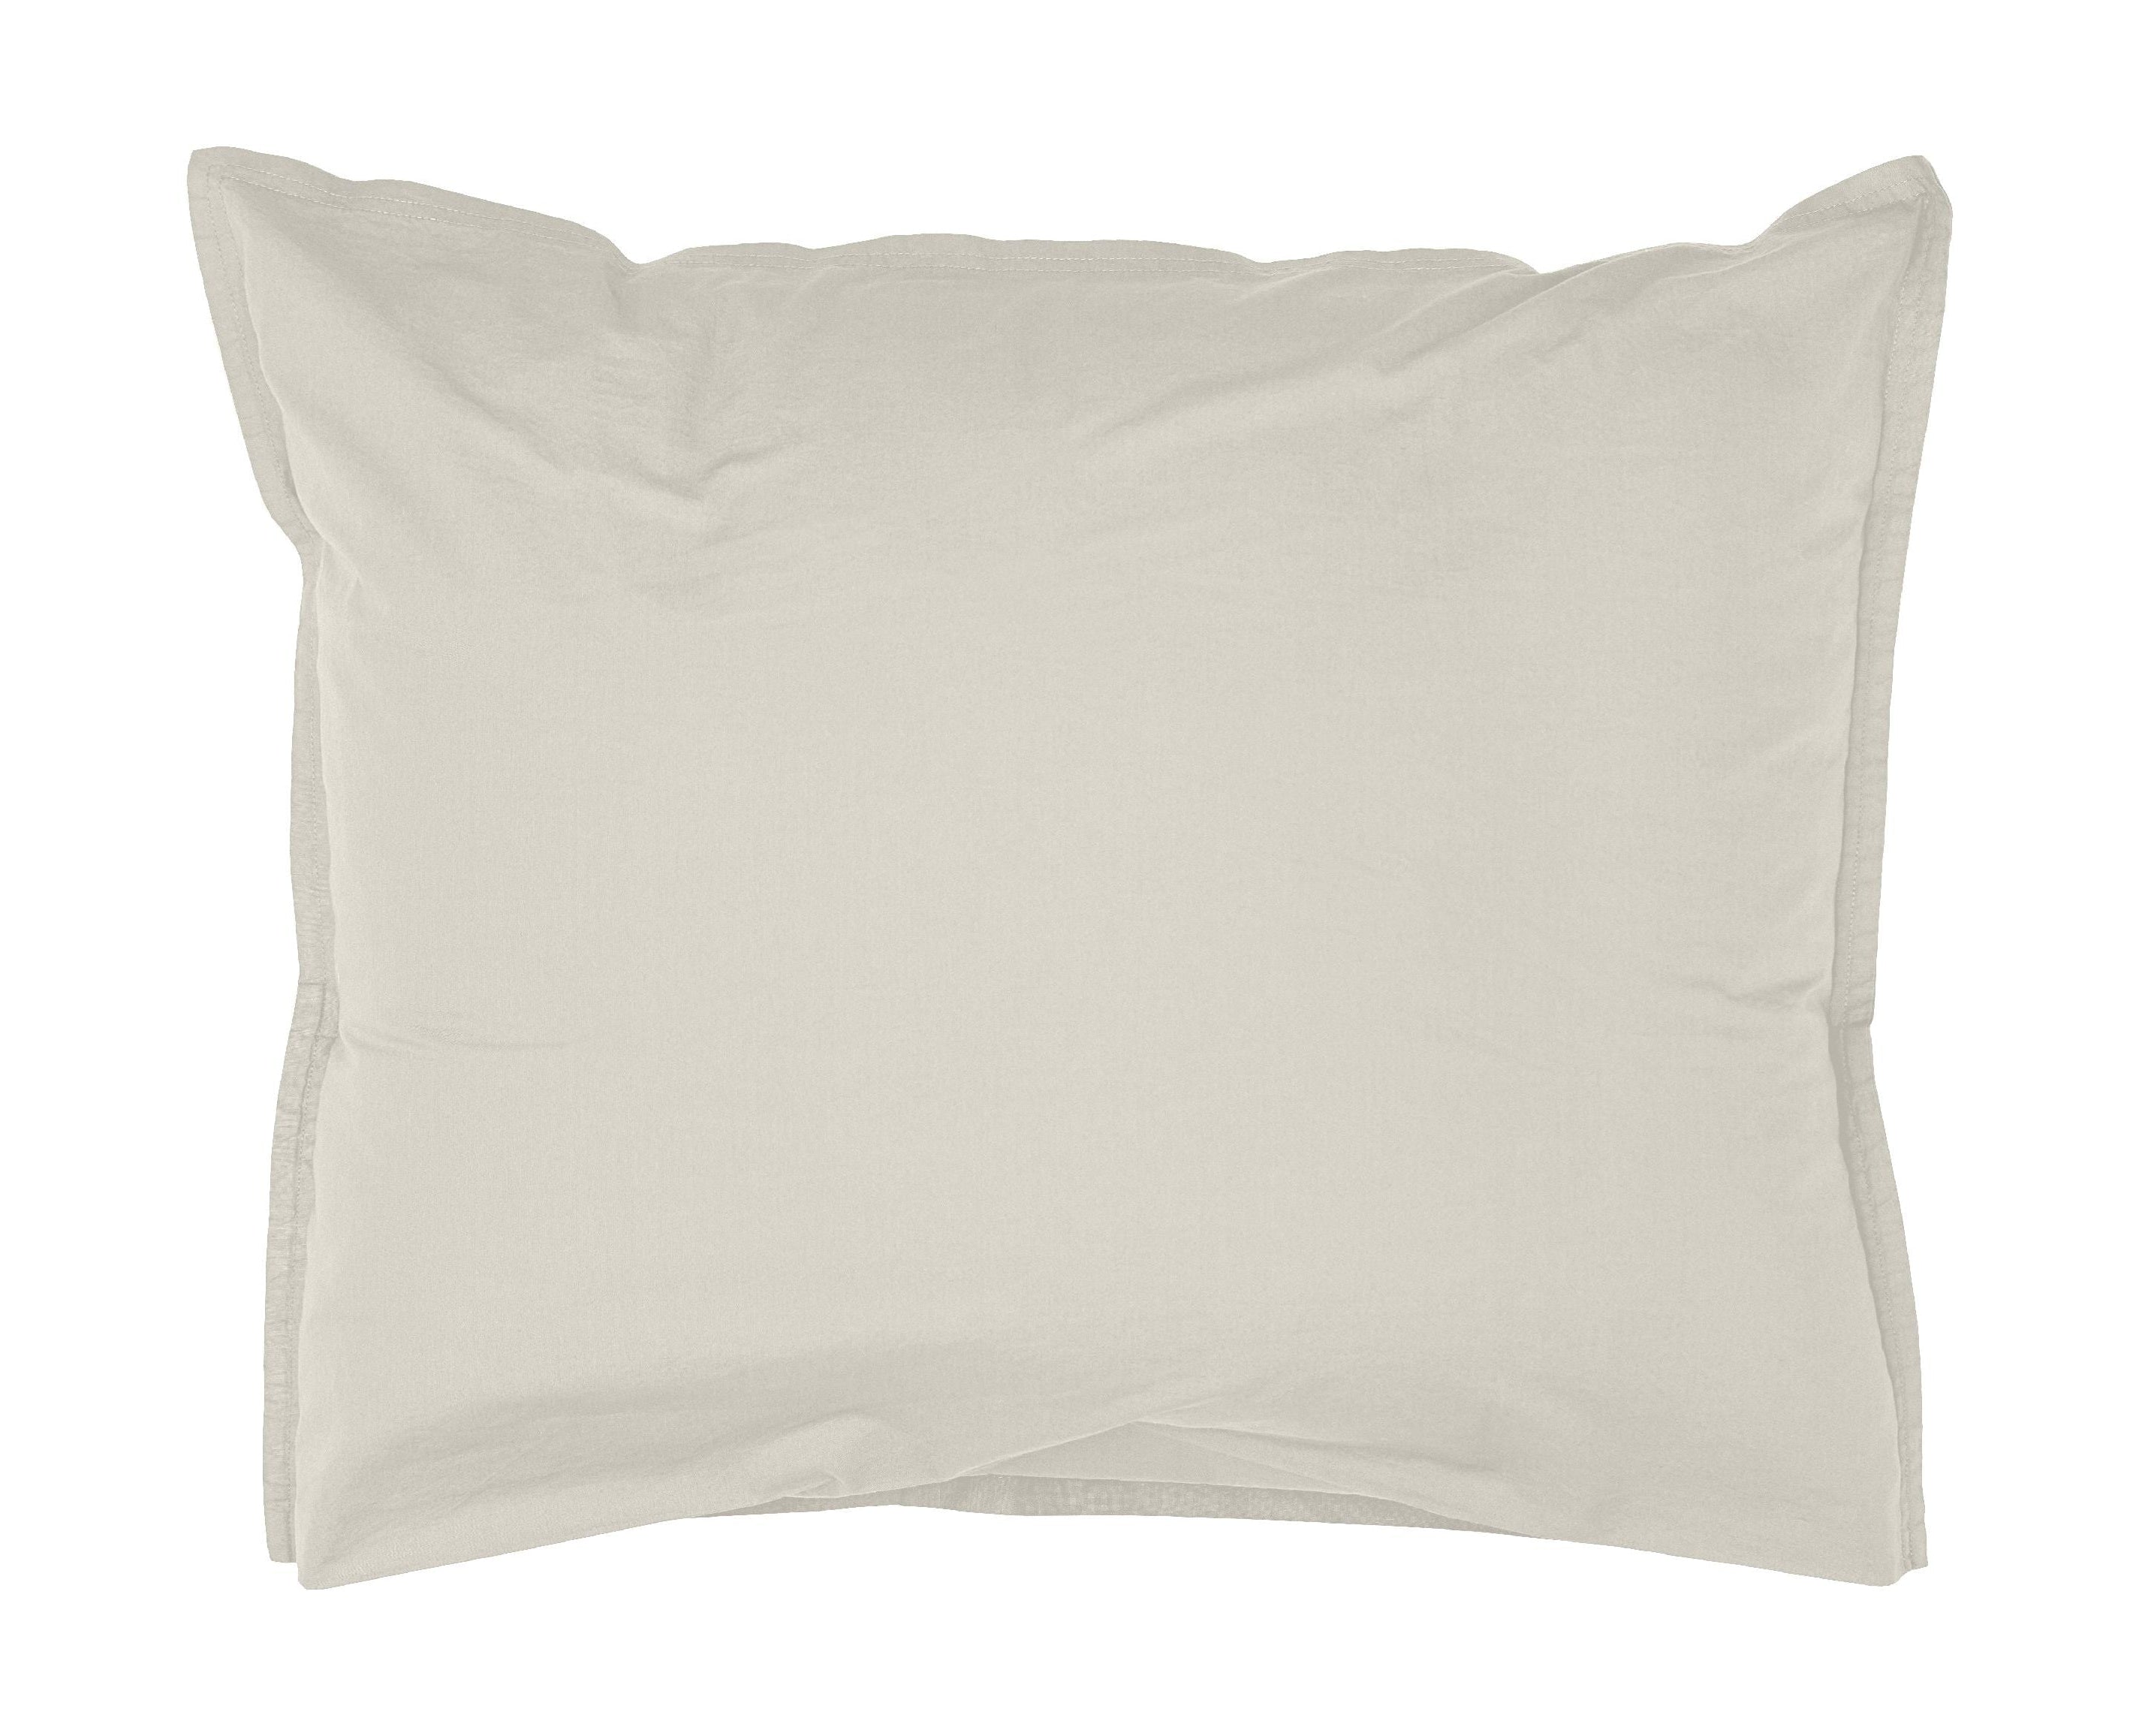 Door Nord Ingrid Cushion Cover 60x50 cm, Shell